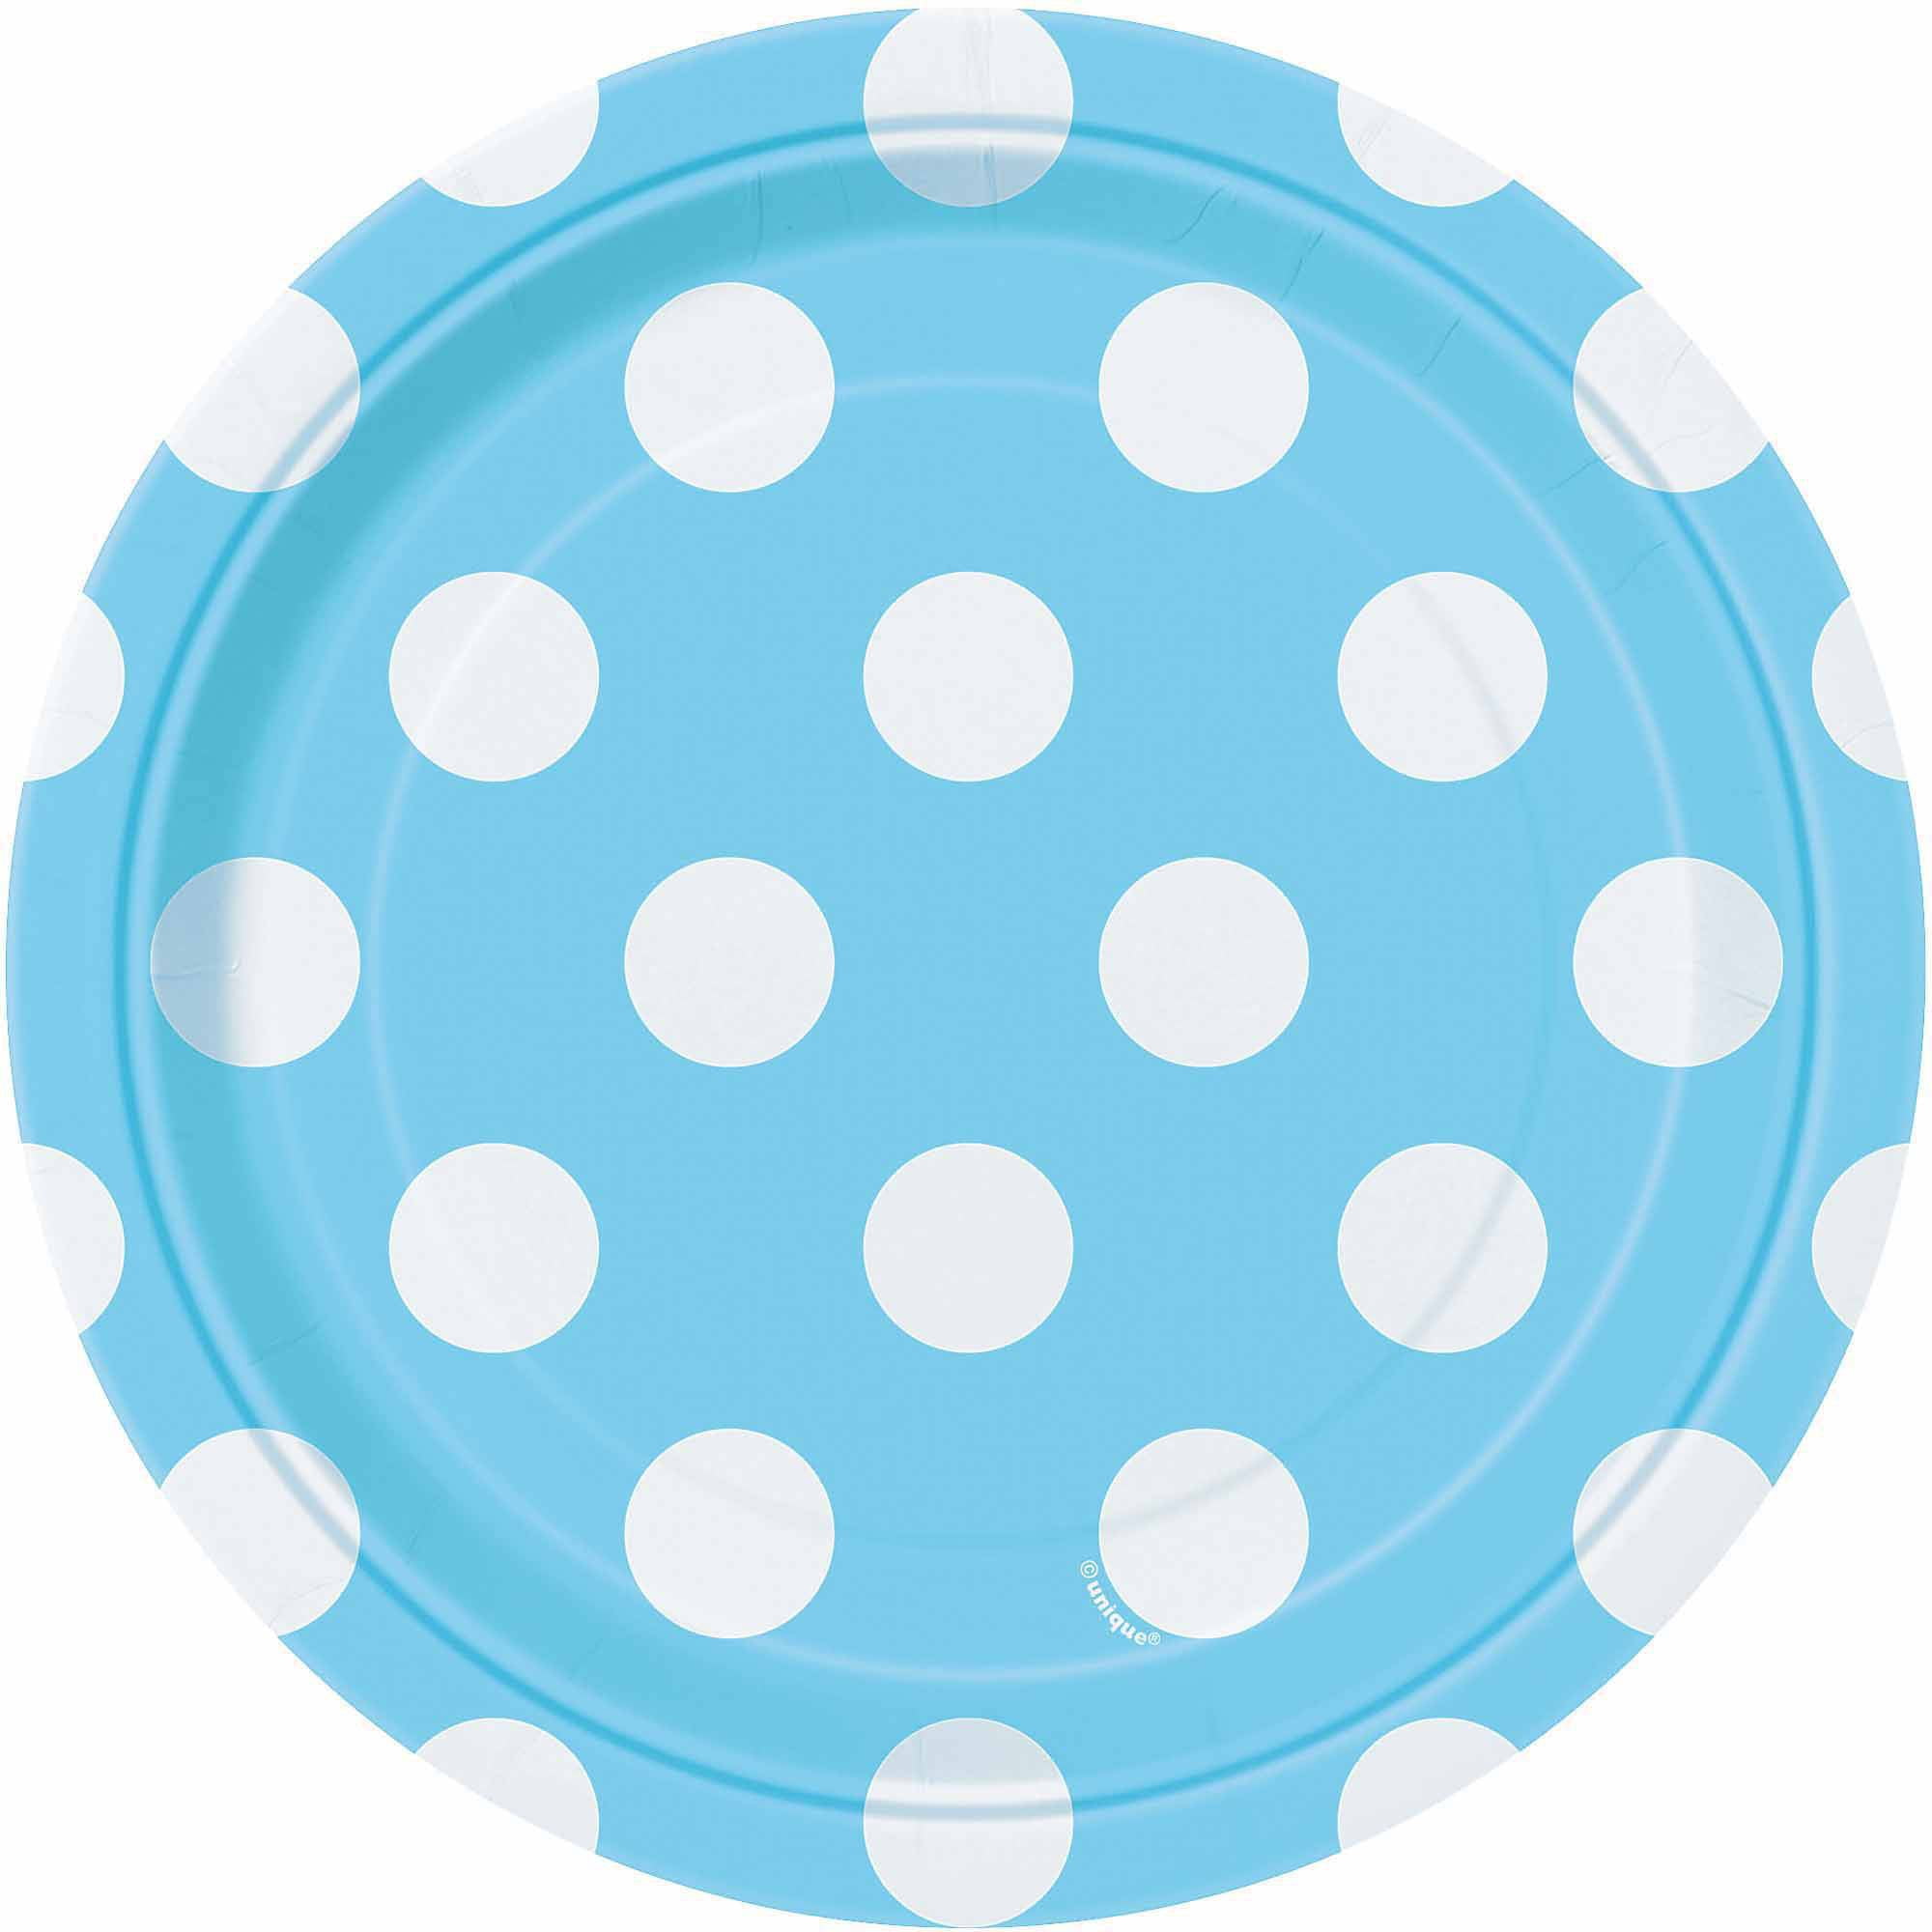 8 x 7" Paper Plates Baby Blue Dots Adults Party Tableware Supplies Polka Spotty